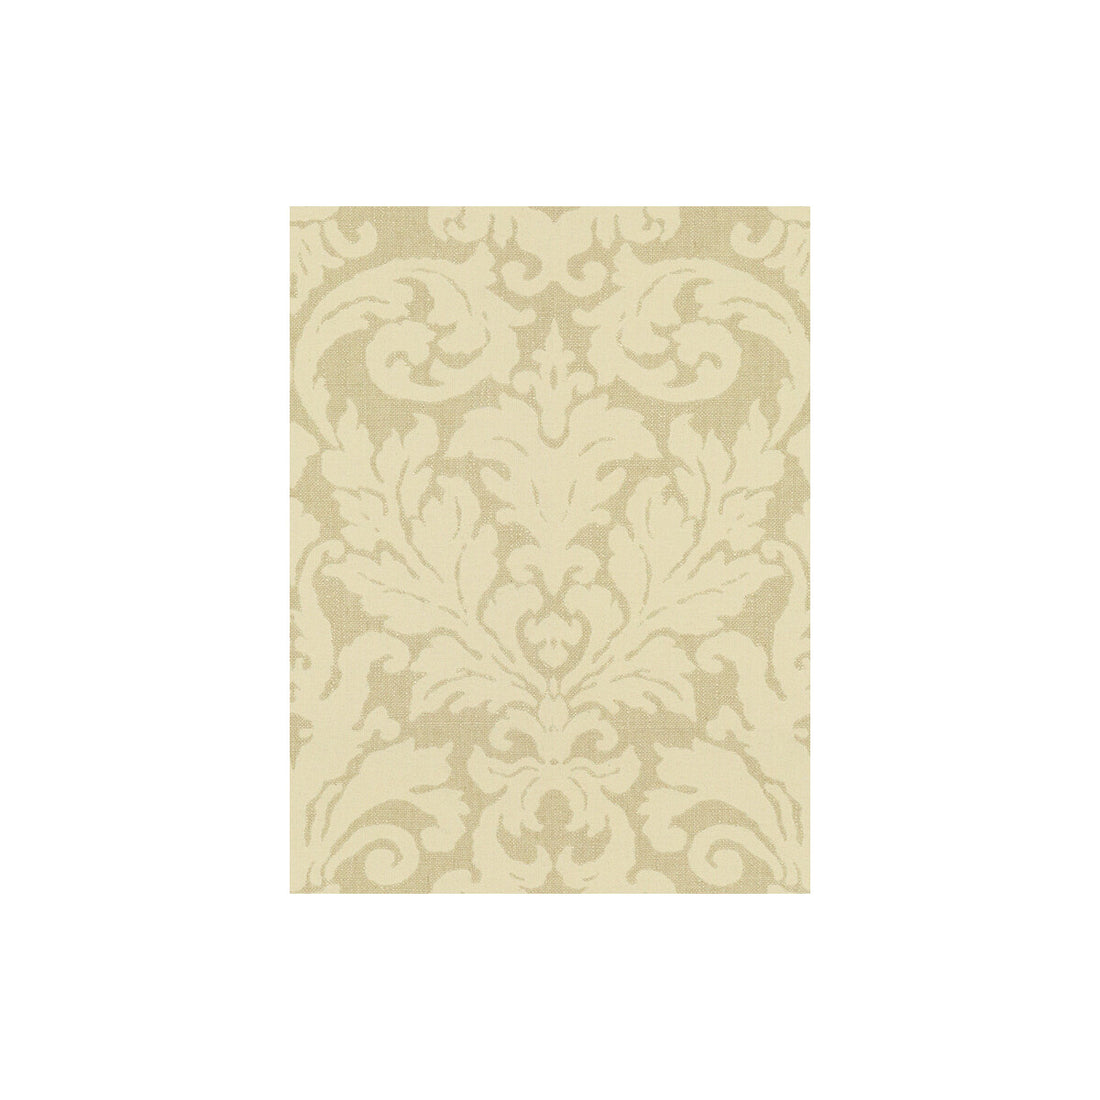 Sitapur fabric in linen color - pattern 32851.16.0 - by Kravet Design in the Barclay Butera II collection